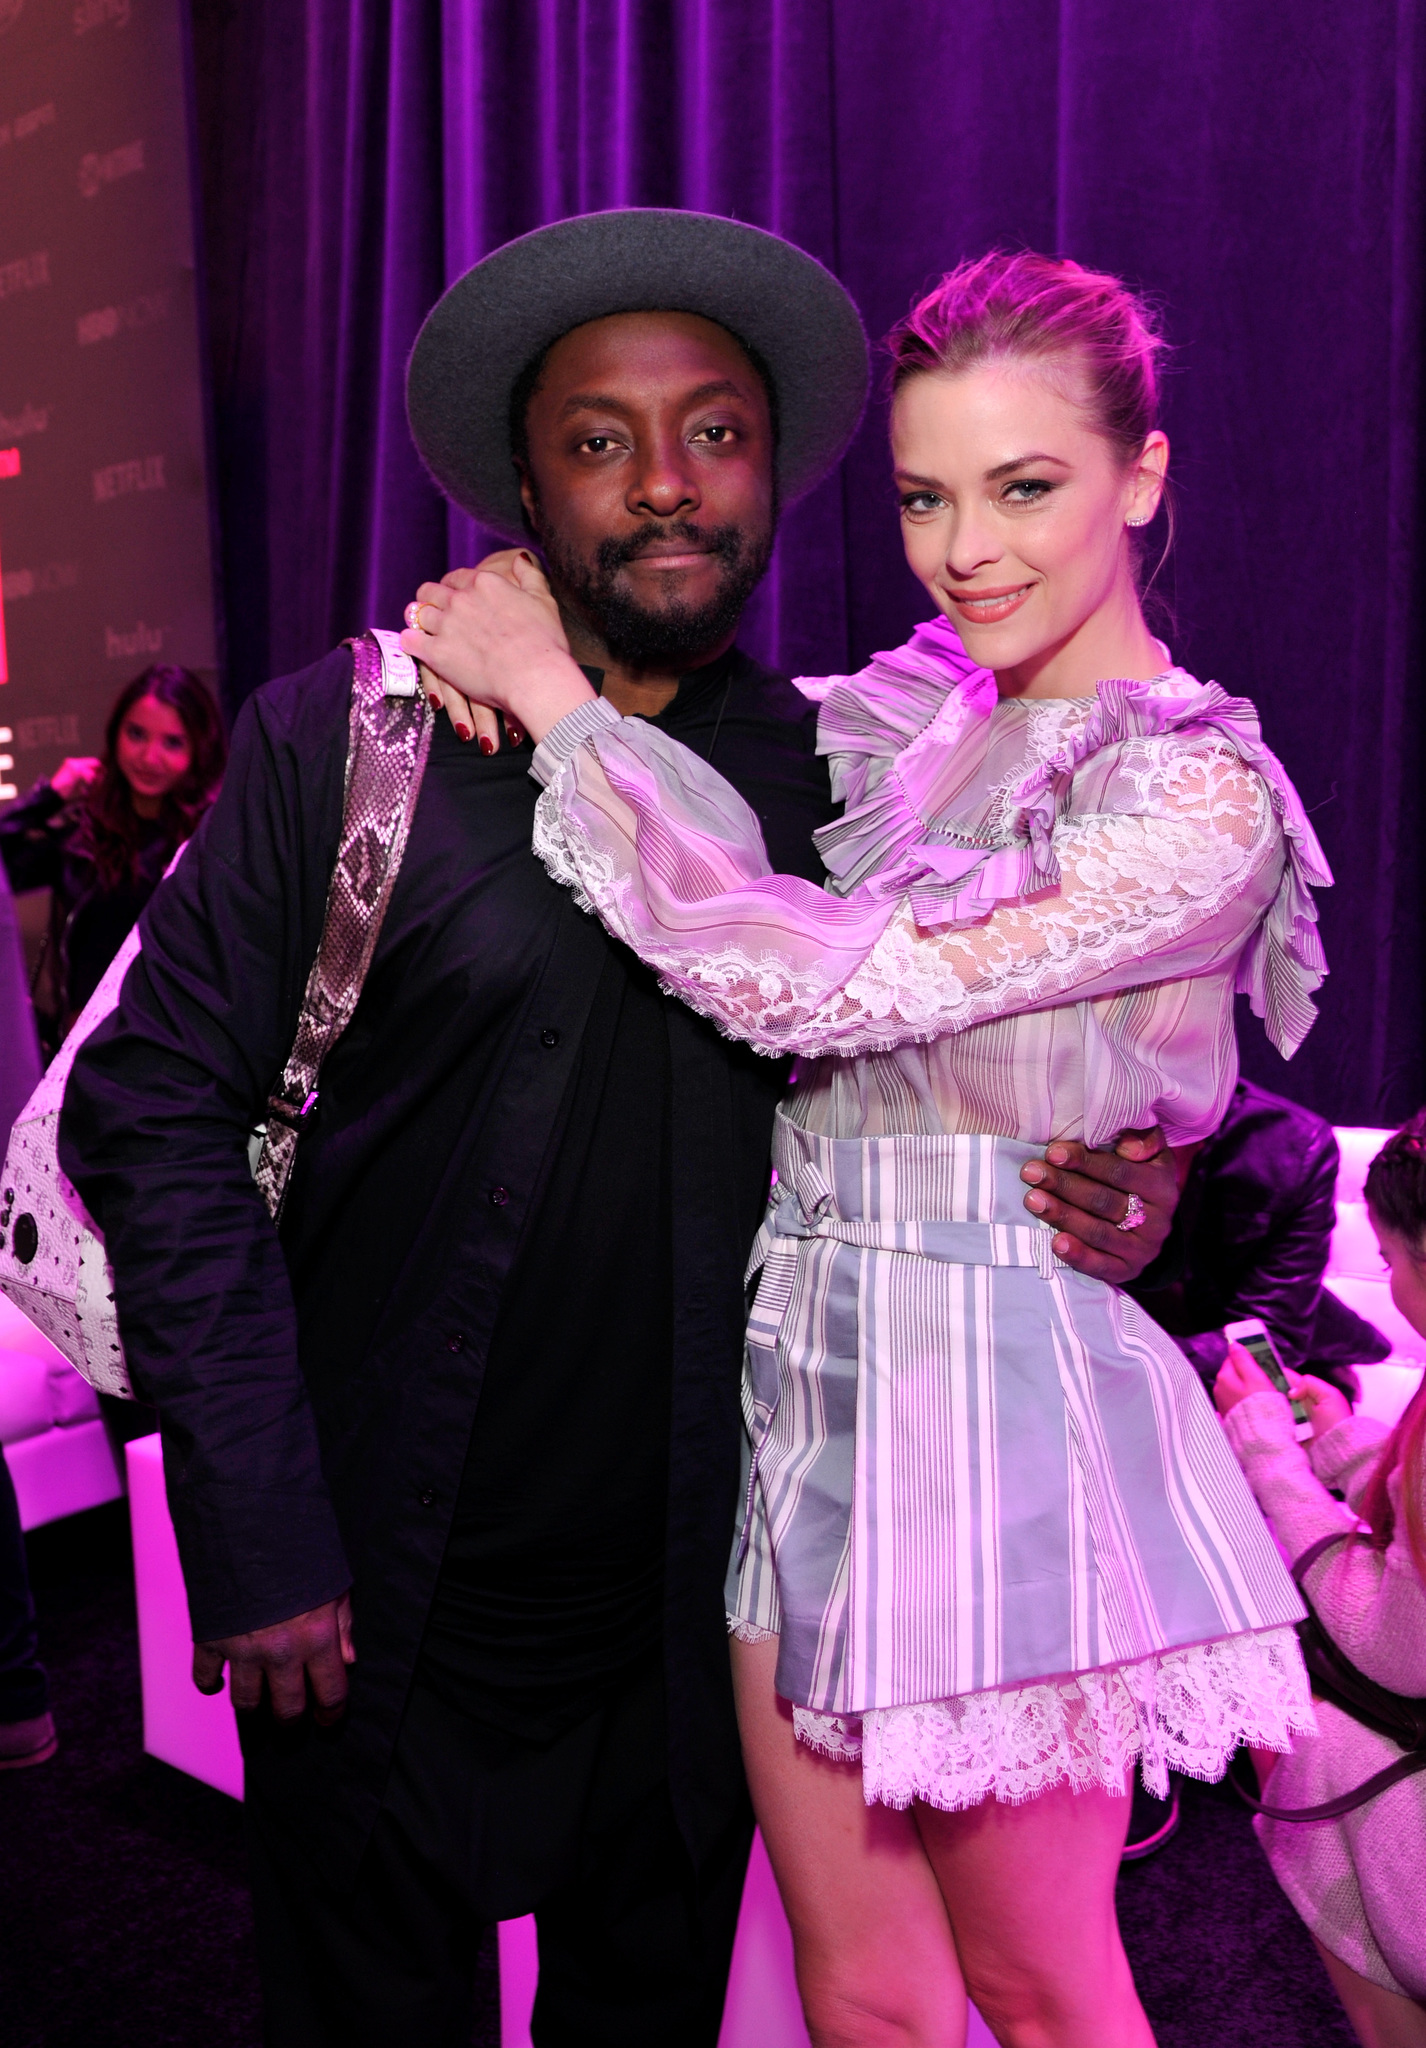 Jaime King and Will.i.am